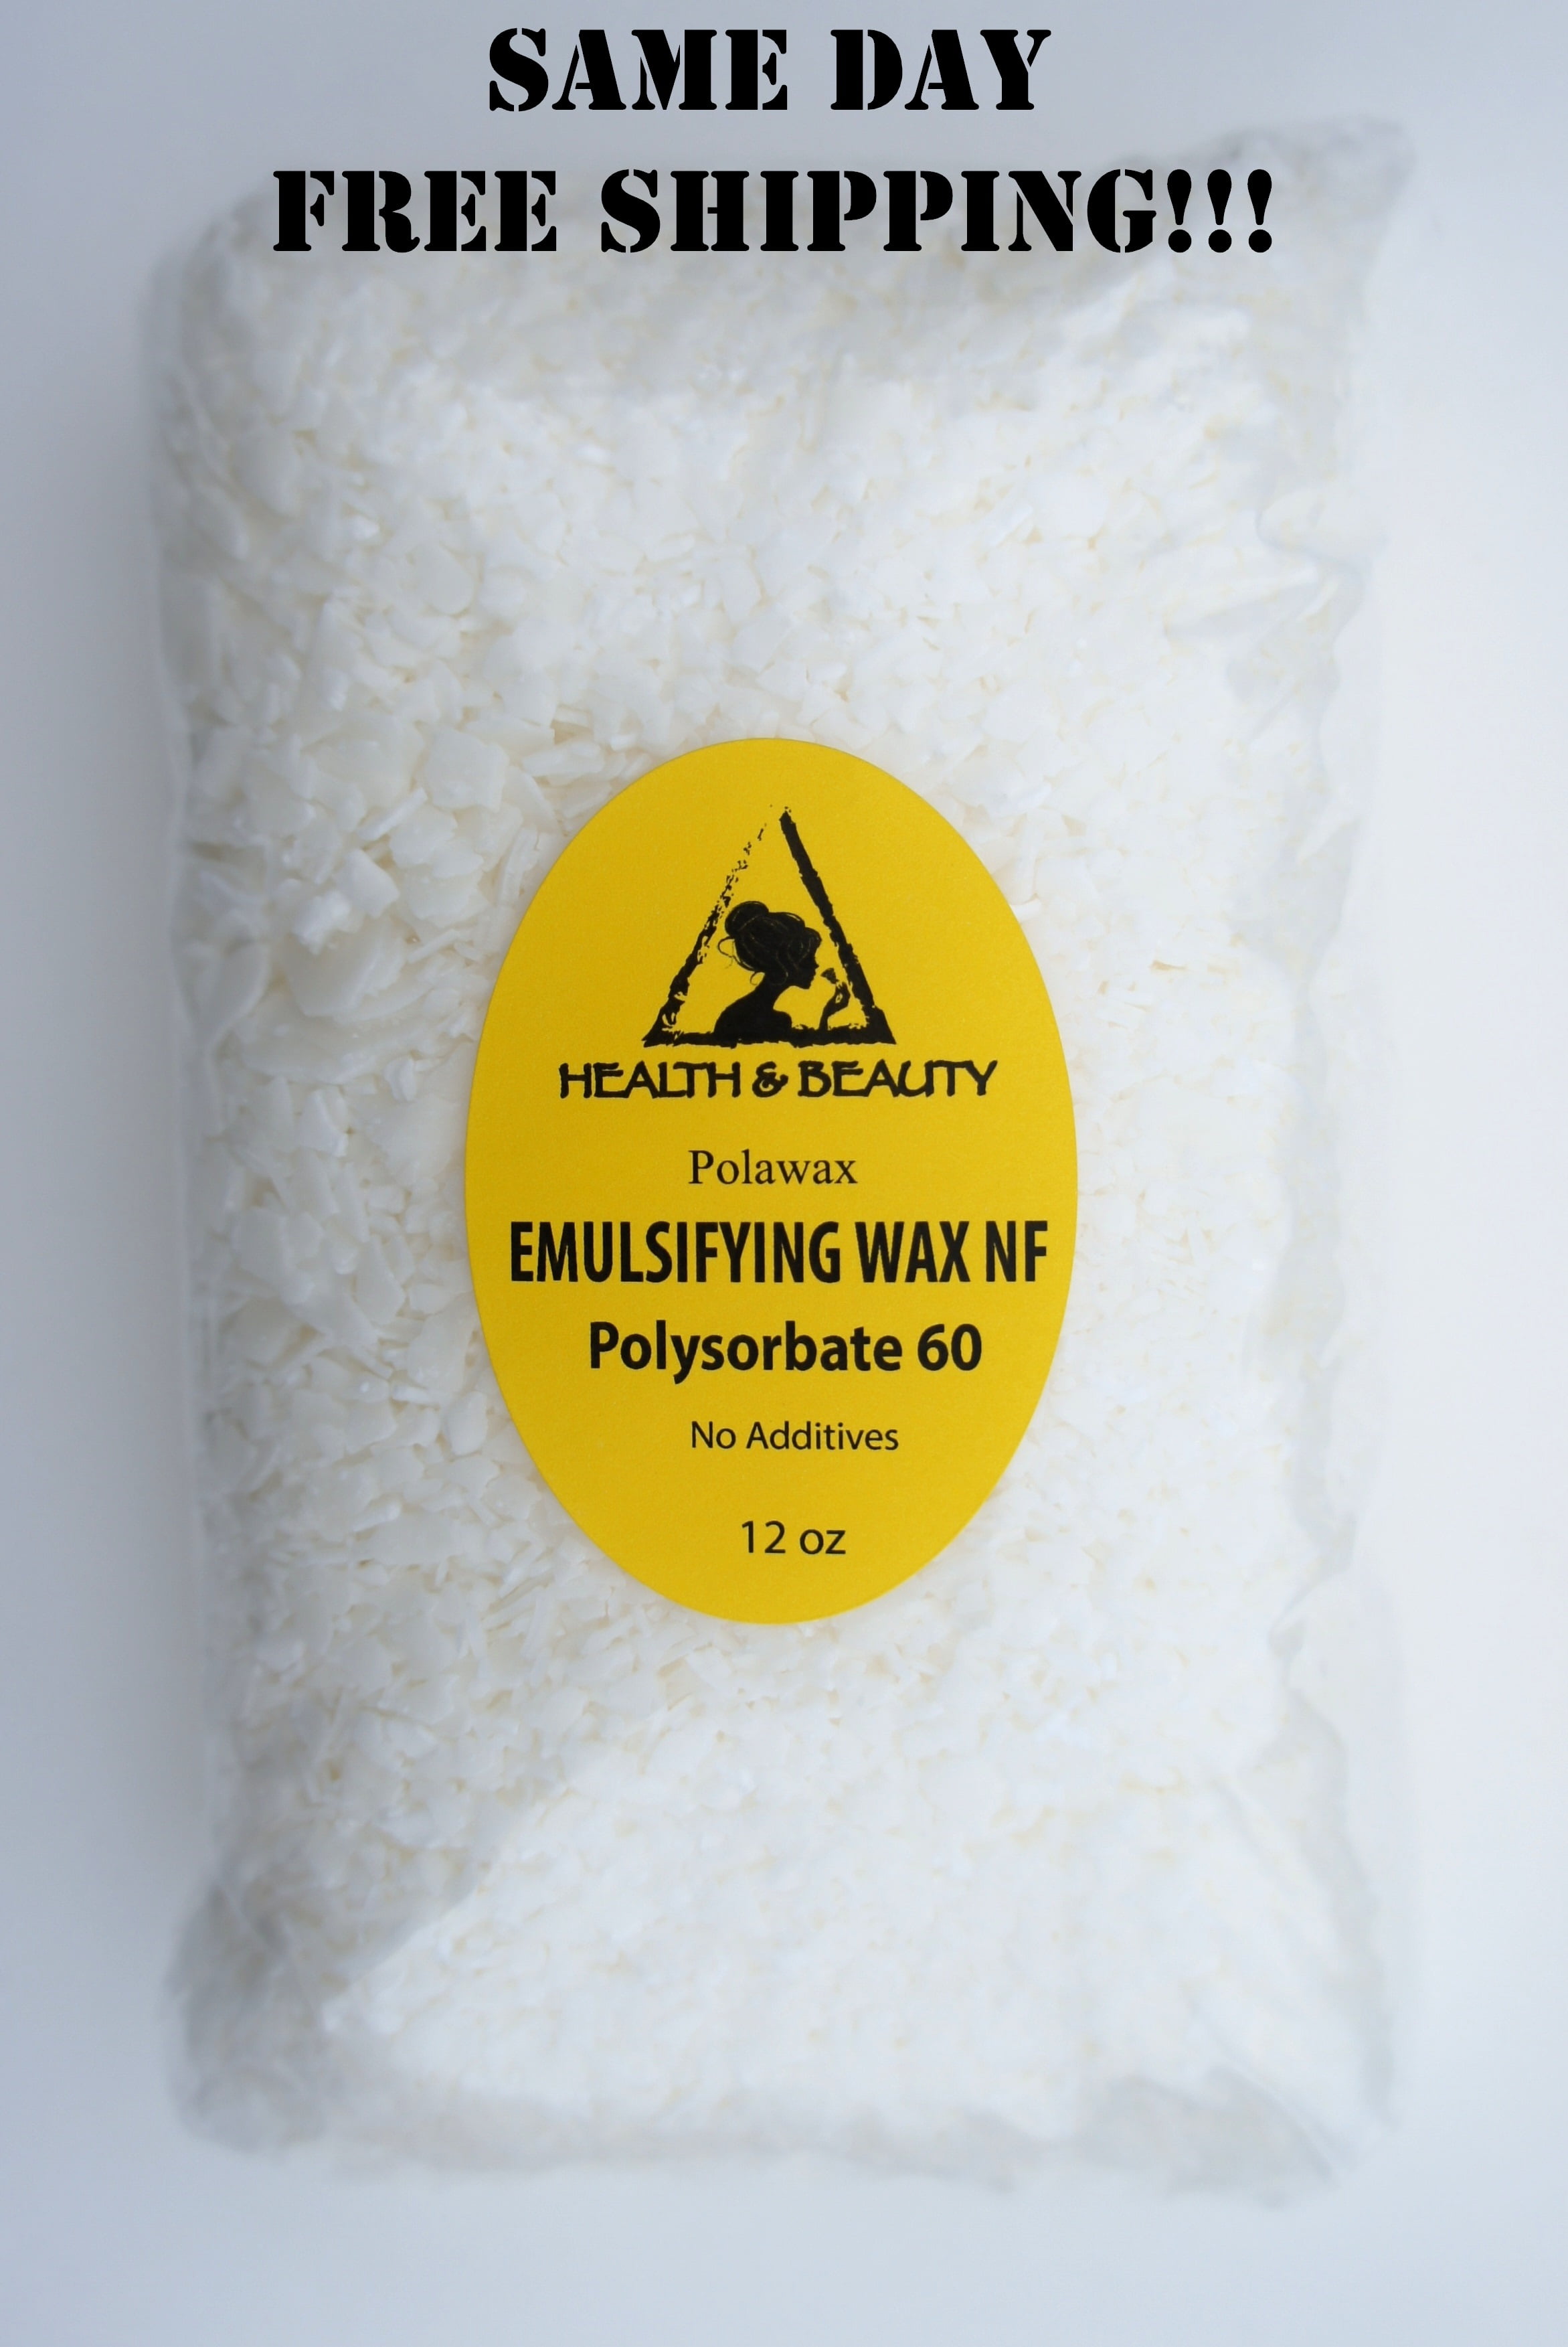 Natural Oils, Butters, Clays, Wholesale Soaps on Instagram: Emulsifying  Wax NF is a non-ionic self-emulsifying wax that is commonly used in  cosmetics and personal care products. NF stands for National Formulary,  which